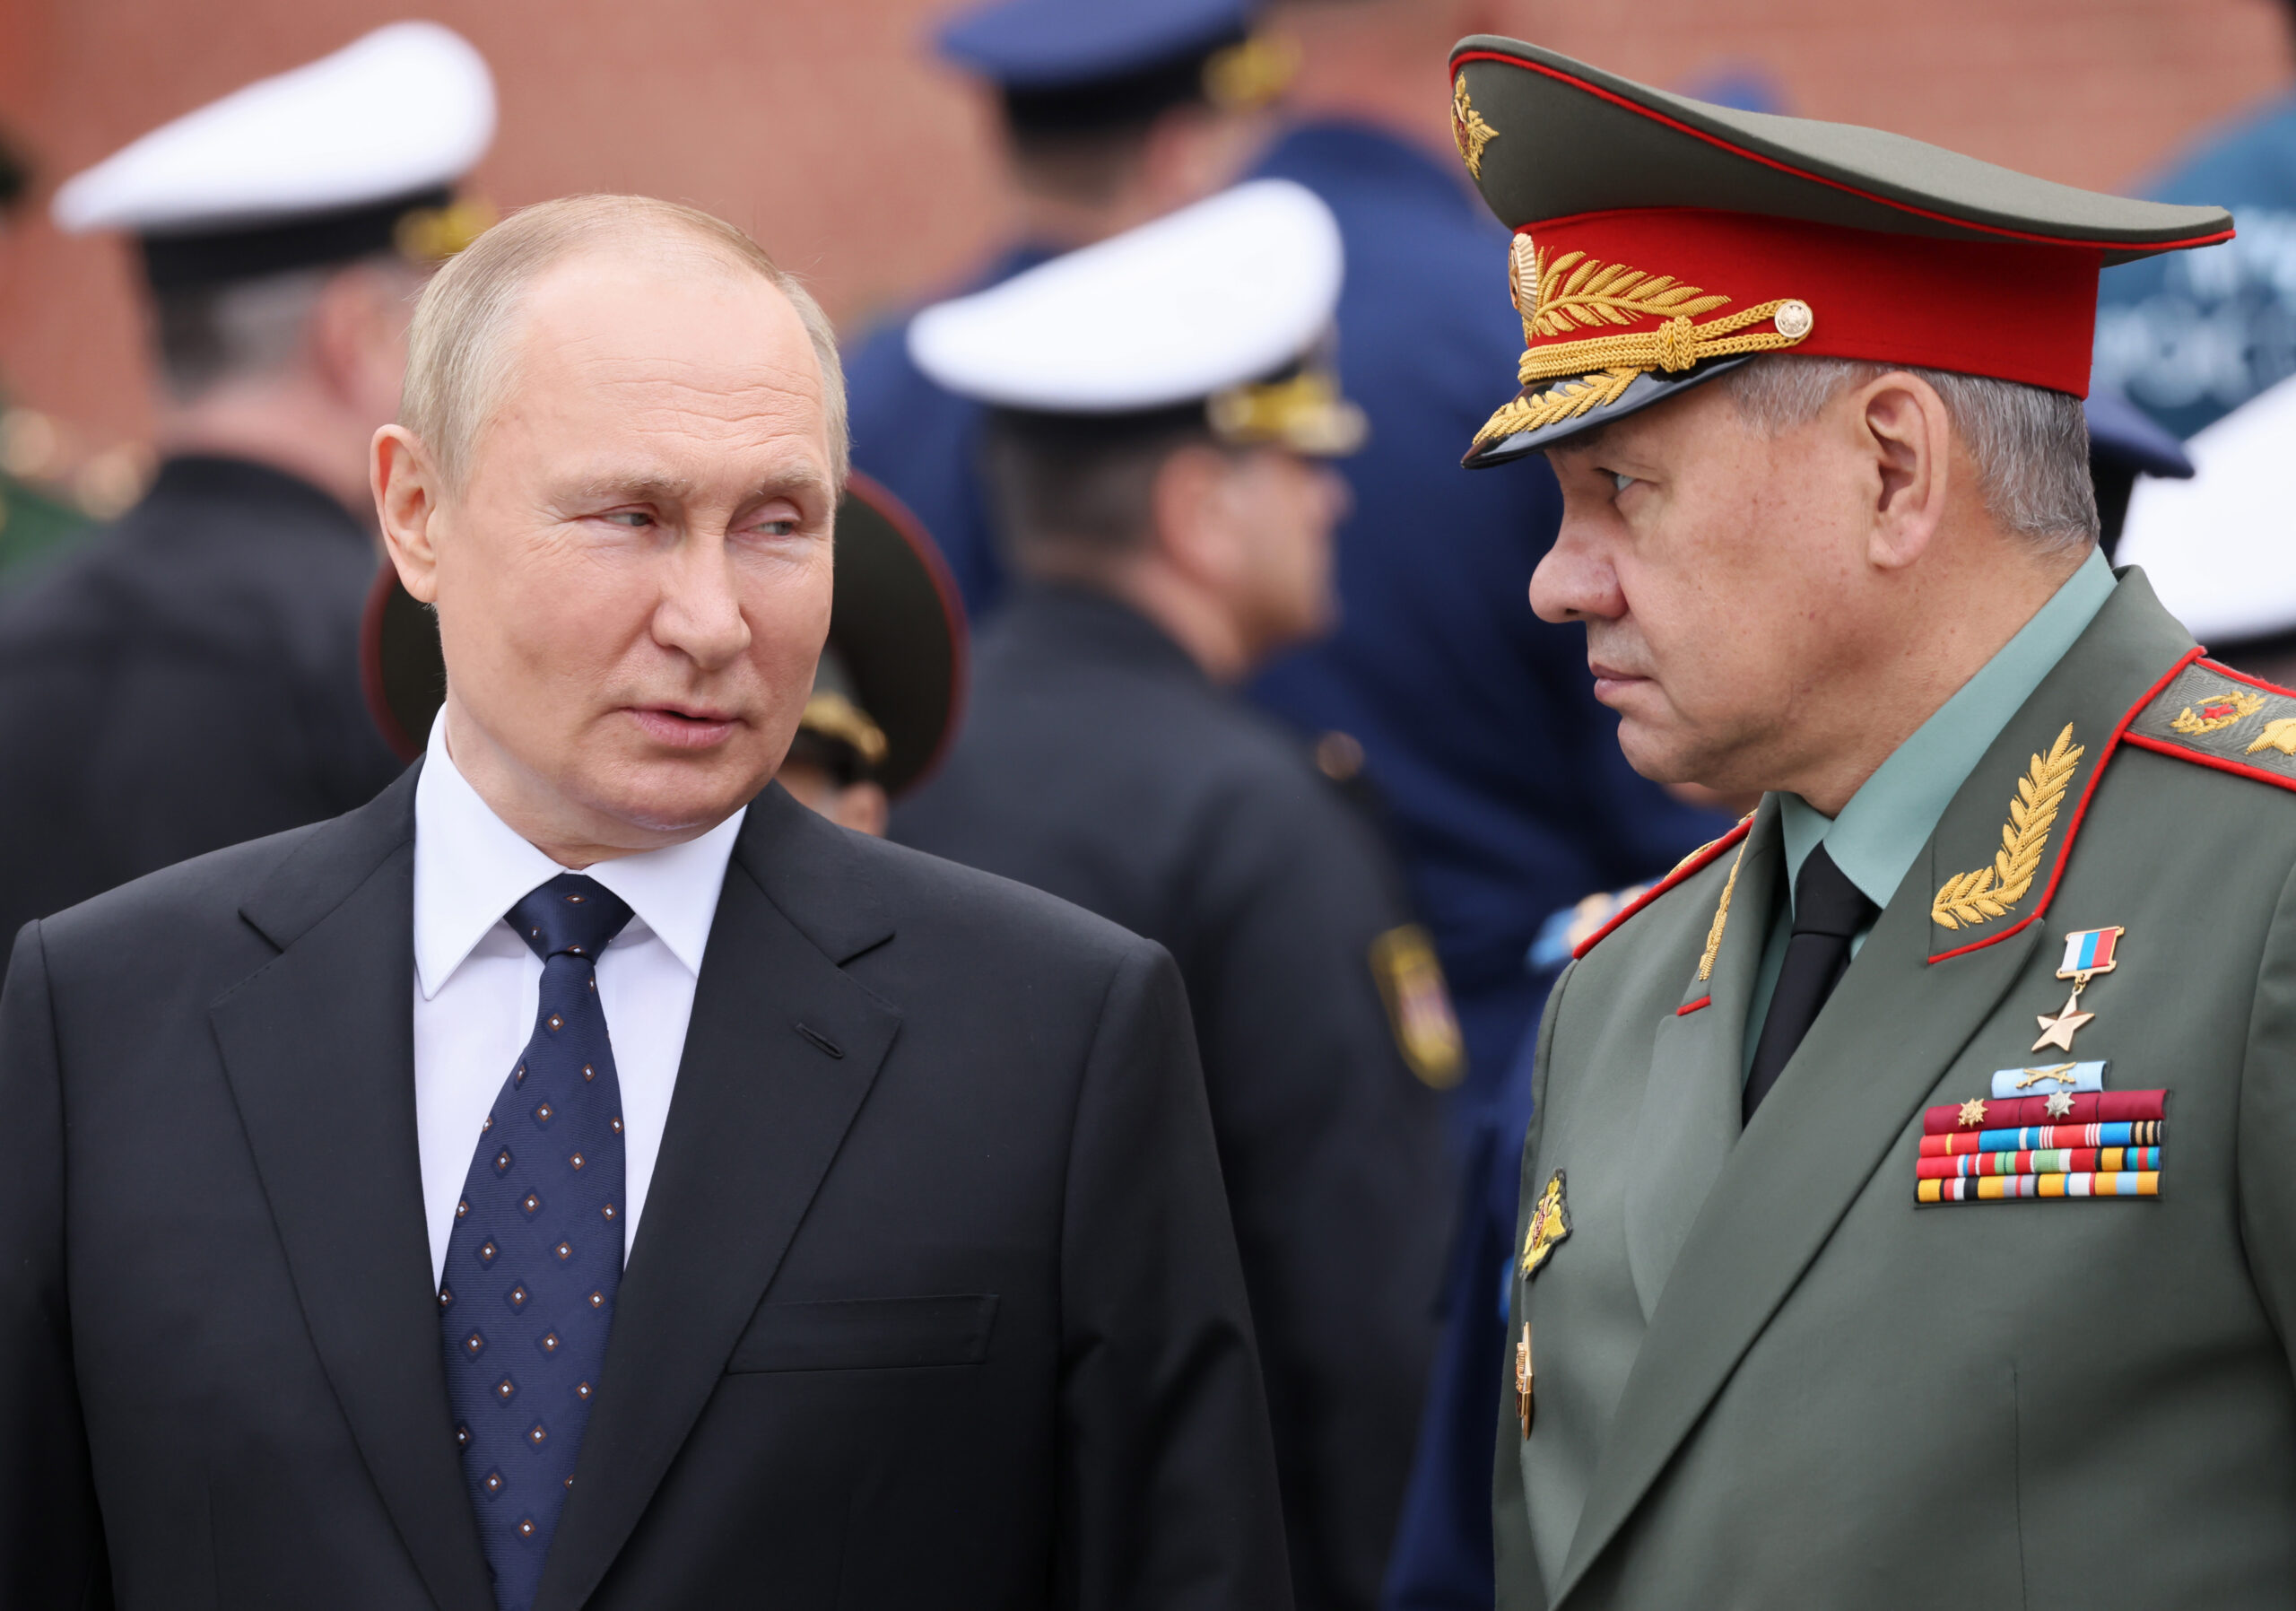 epa10027464 Russian President Vladimir Putin (L) and Russian Defence Minister Sergei Shoigu (R) attend a wreath-laying ceremony at the Tomb of the Unknown Soldier in the Alexandrovsky Garden near the Kremlin wall in Moscow, Russia, 22 June 2022. Day of Remembrance and Sorrow is observed annually on 22 June in Russia to commemorate those who died defending the Soviet Union from Nazi Germany and its allies during Operation Barbarossa, launched on 22 June 1941.  EPA-EFE/MIKHAIL METZEL / KREMLIN POOL / SPUTNIK MANDATORY CREDIT